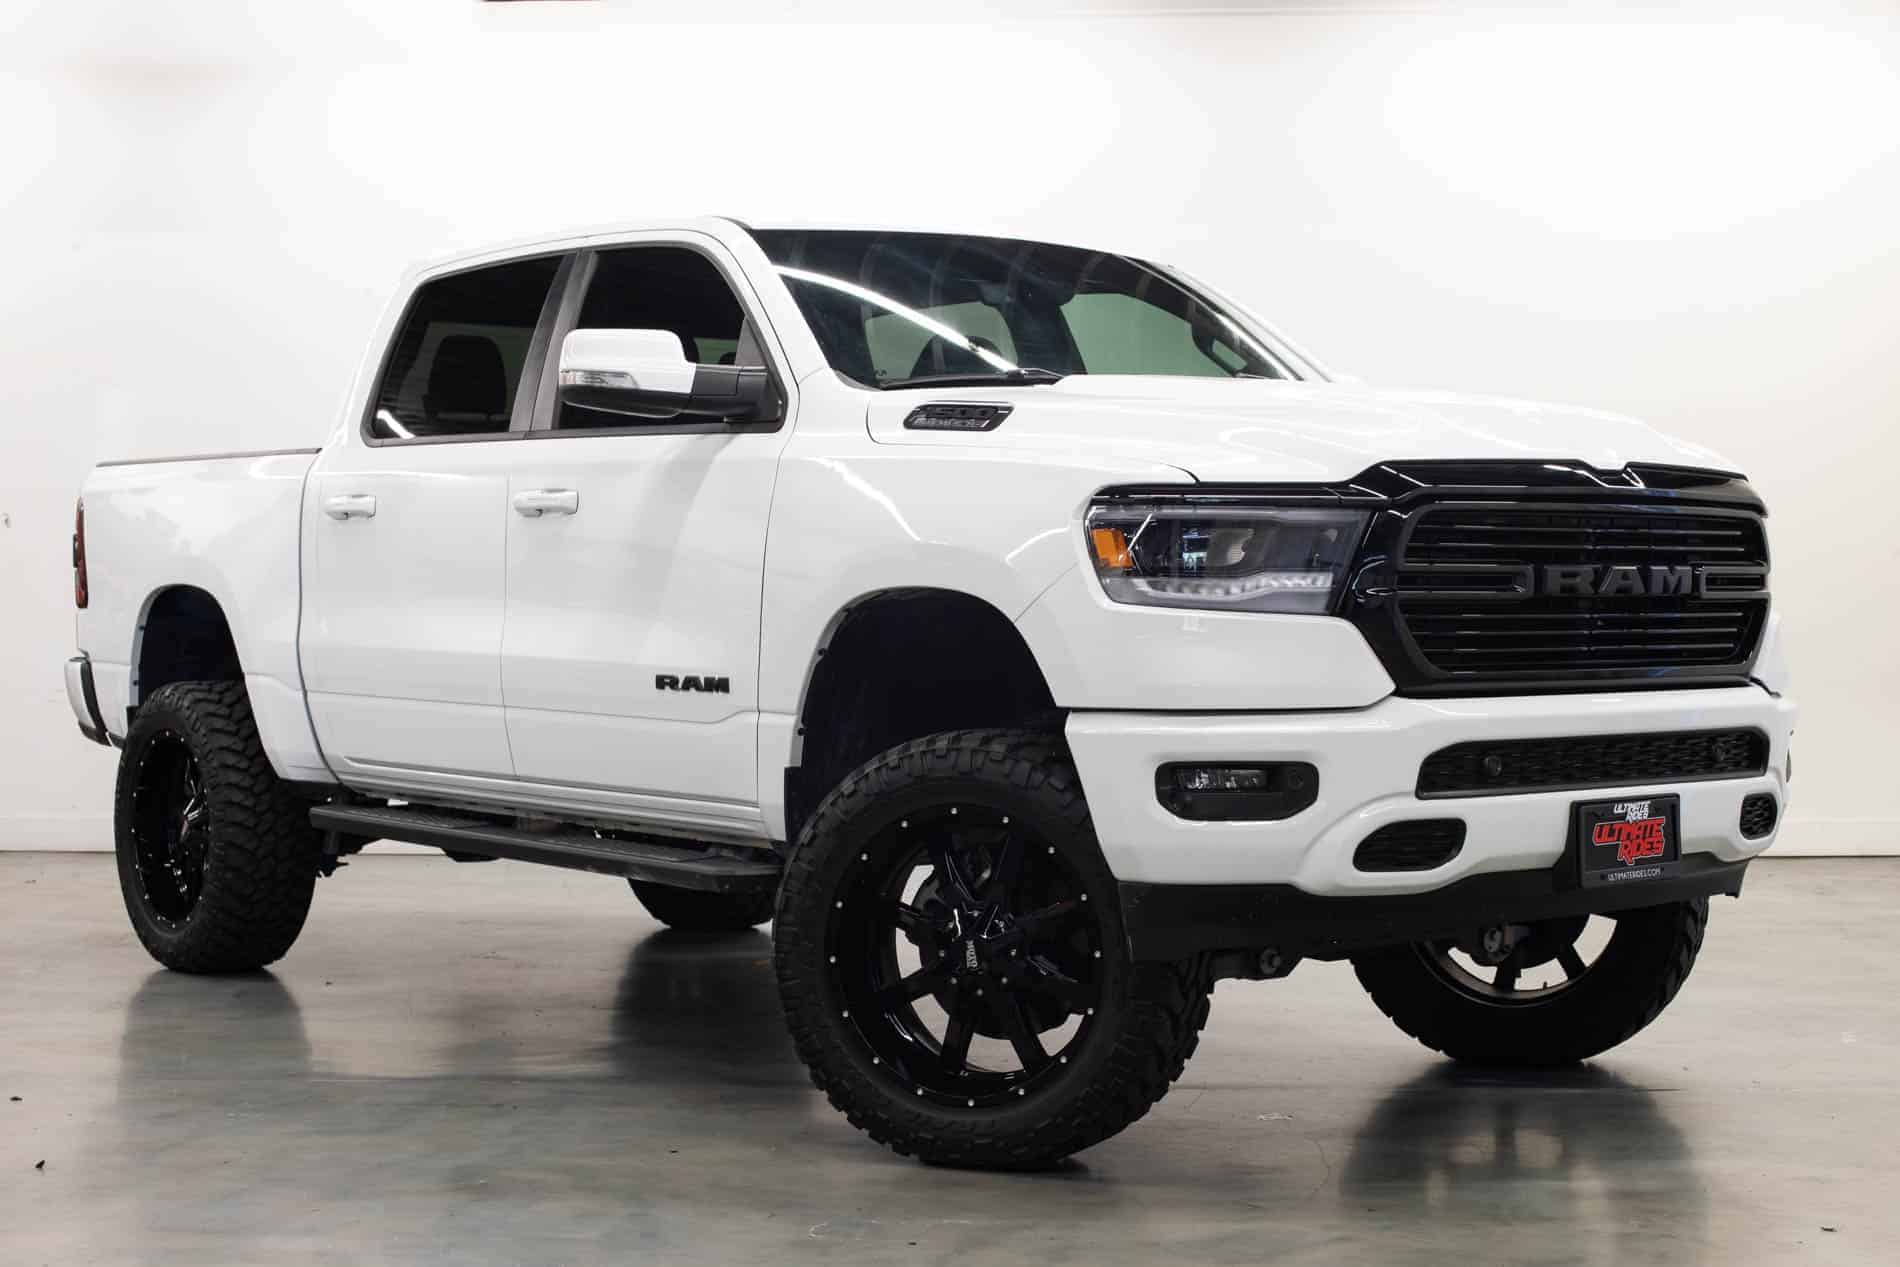 Lifted Trucks for Sale Virginia